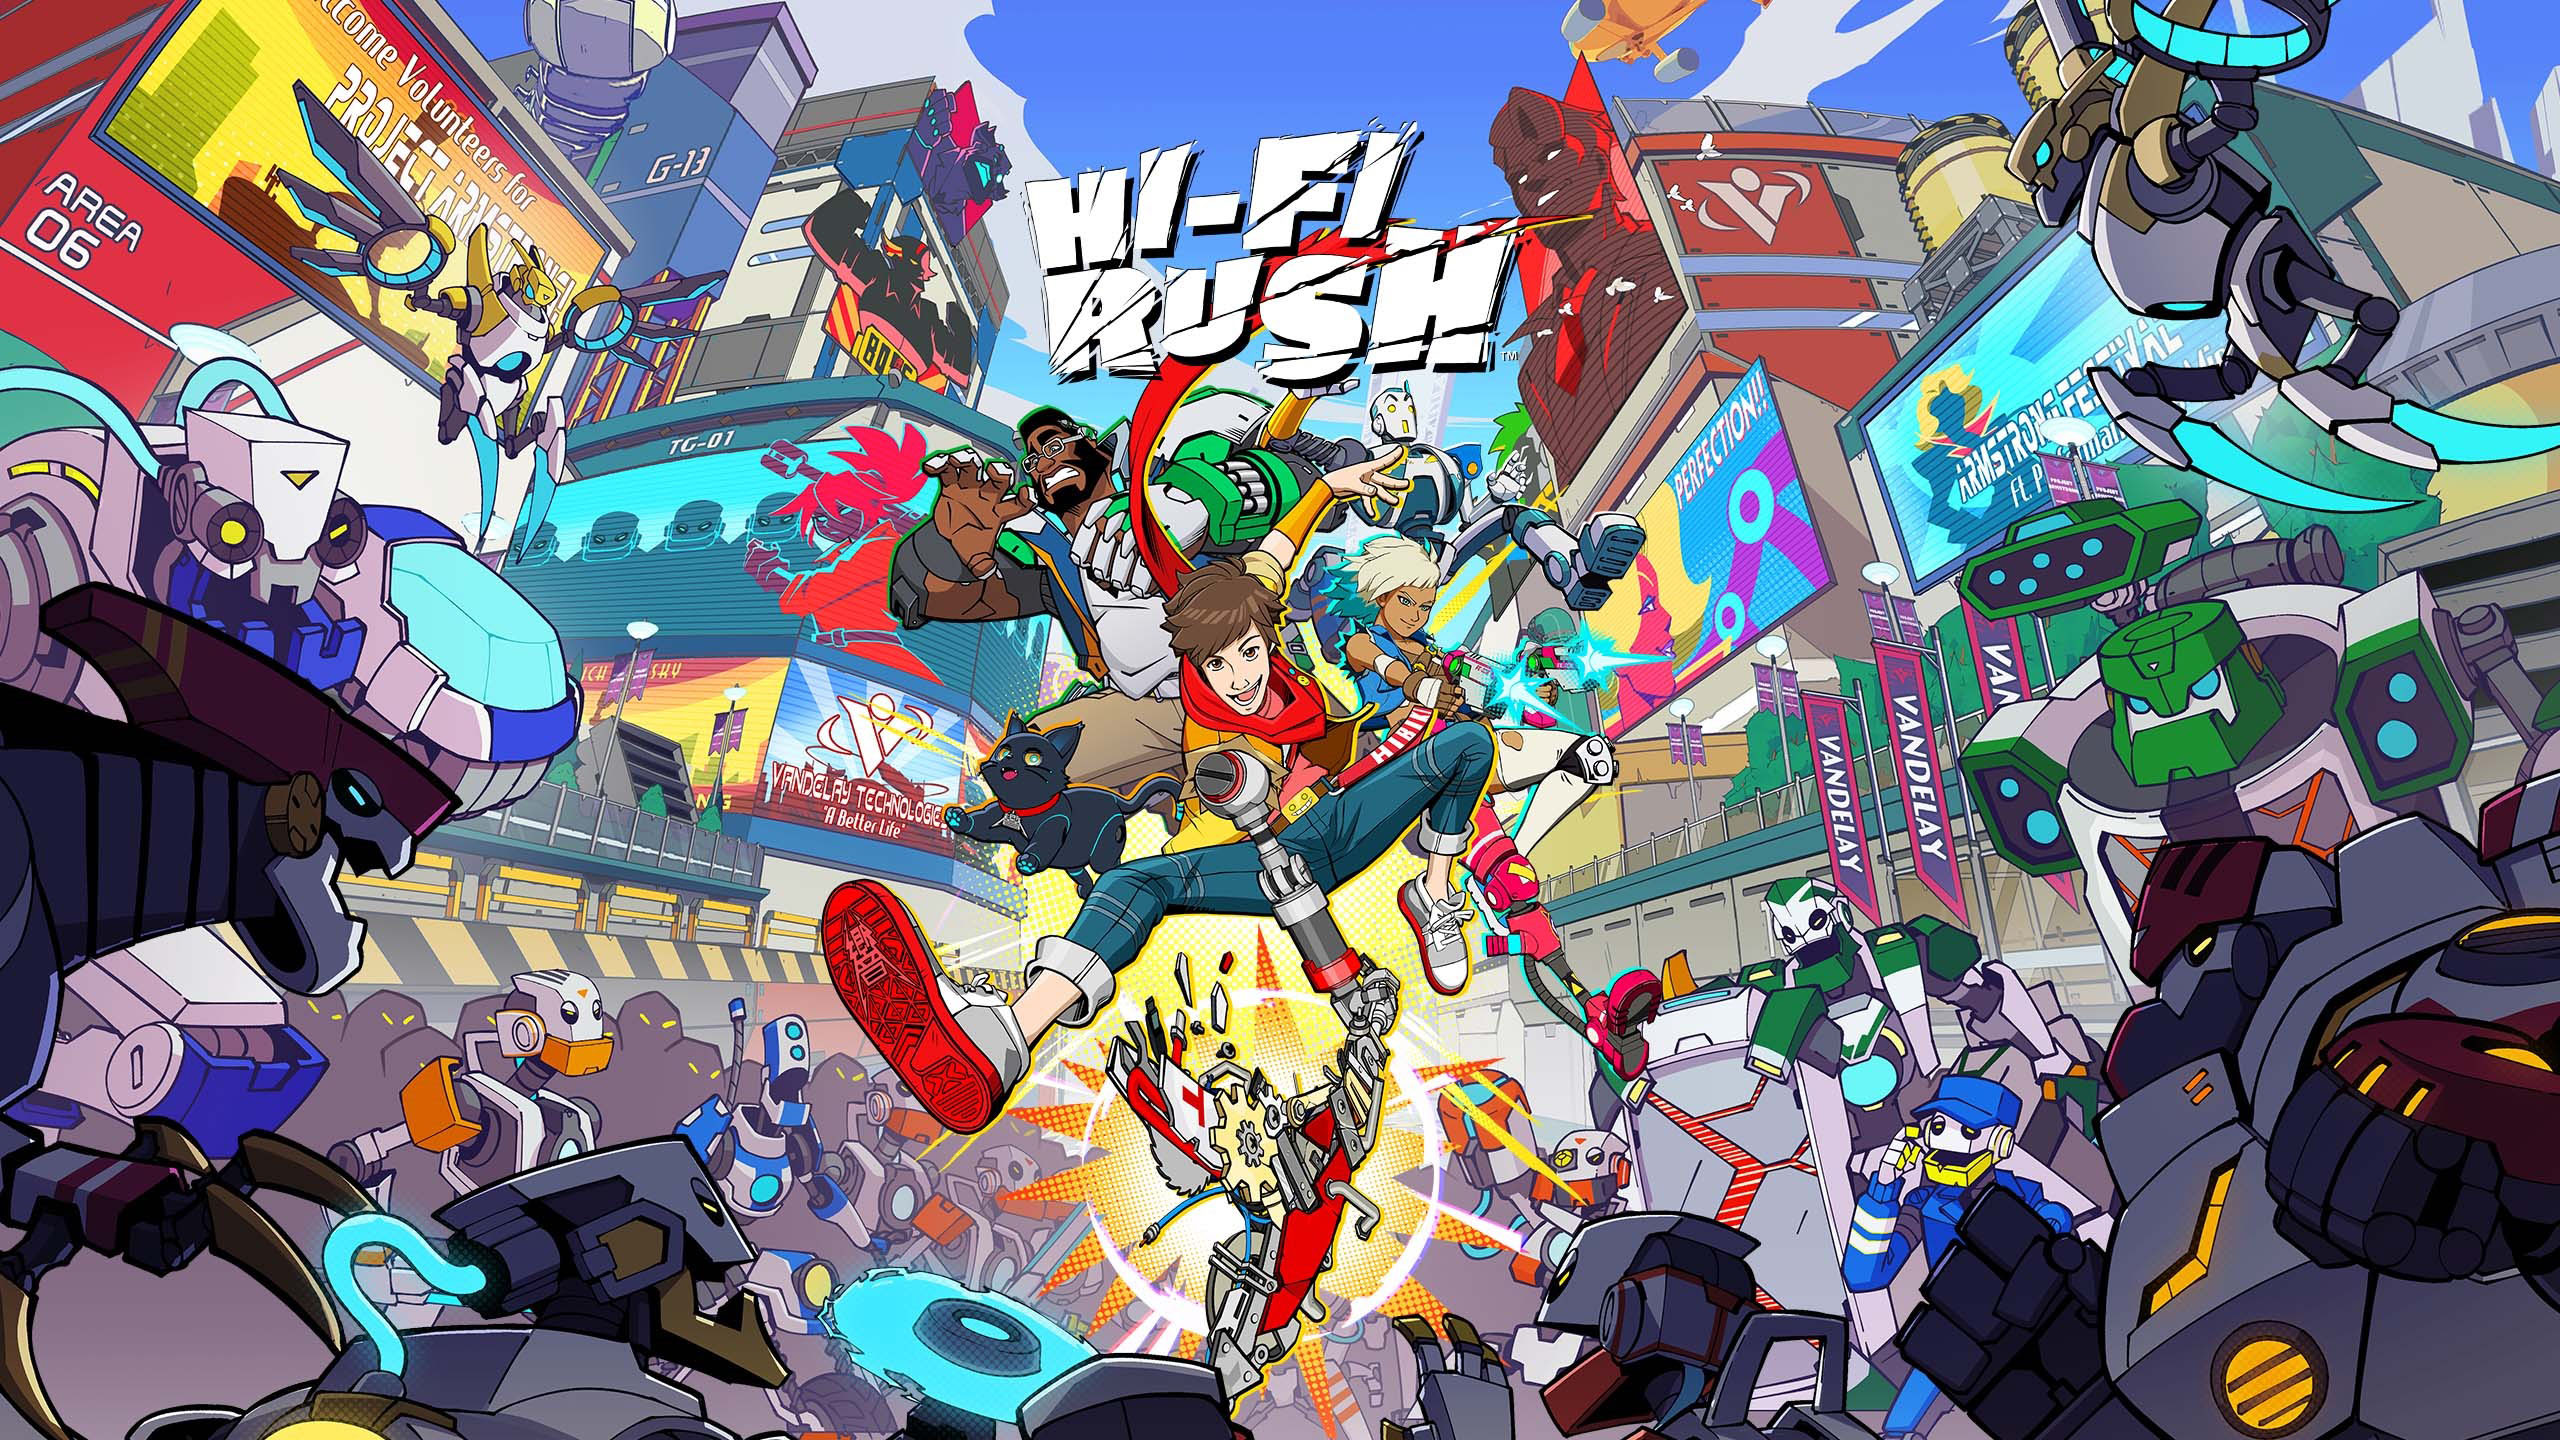 HI-FI RUSH announced, new rhythm action game from Tango Gameworks